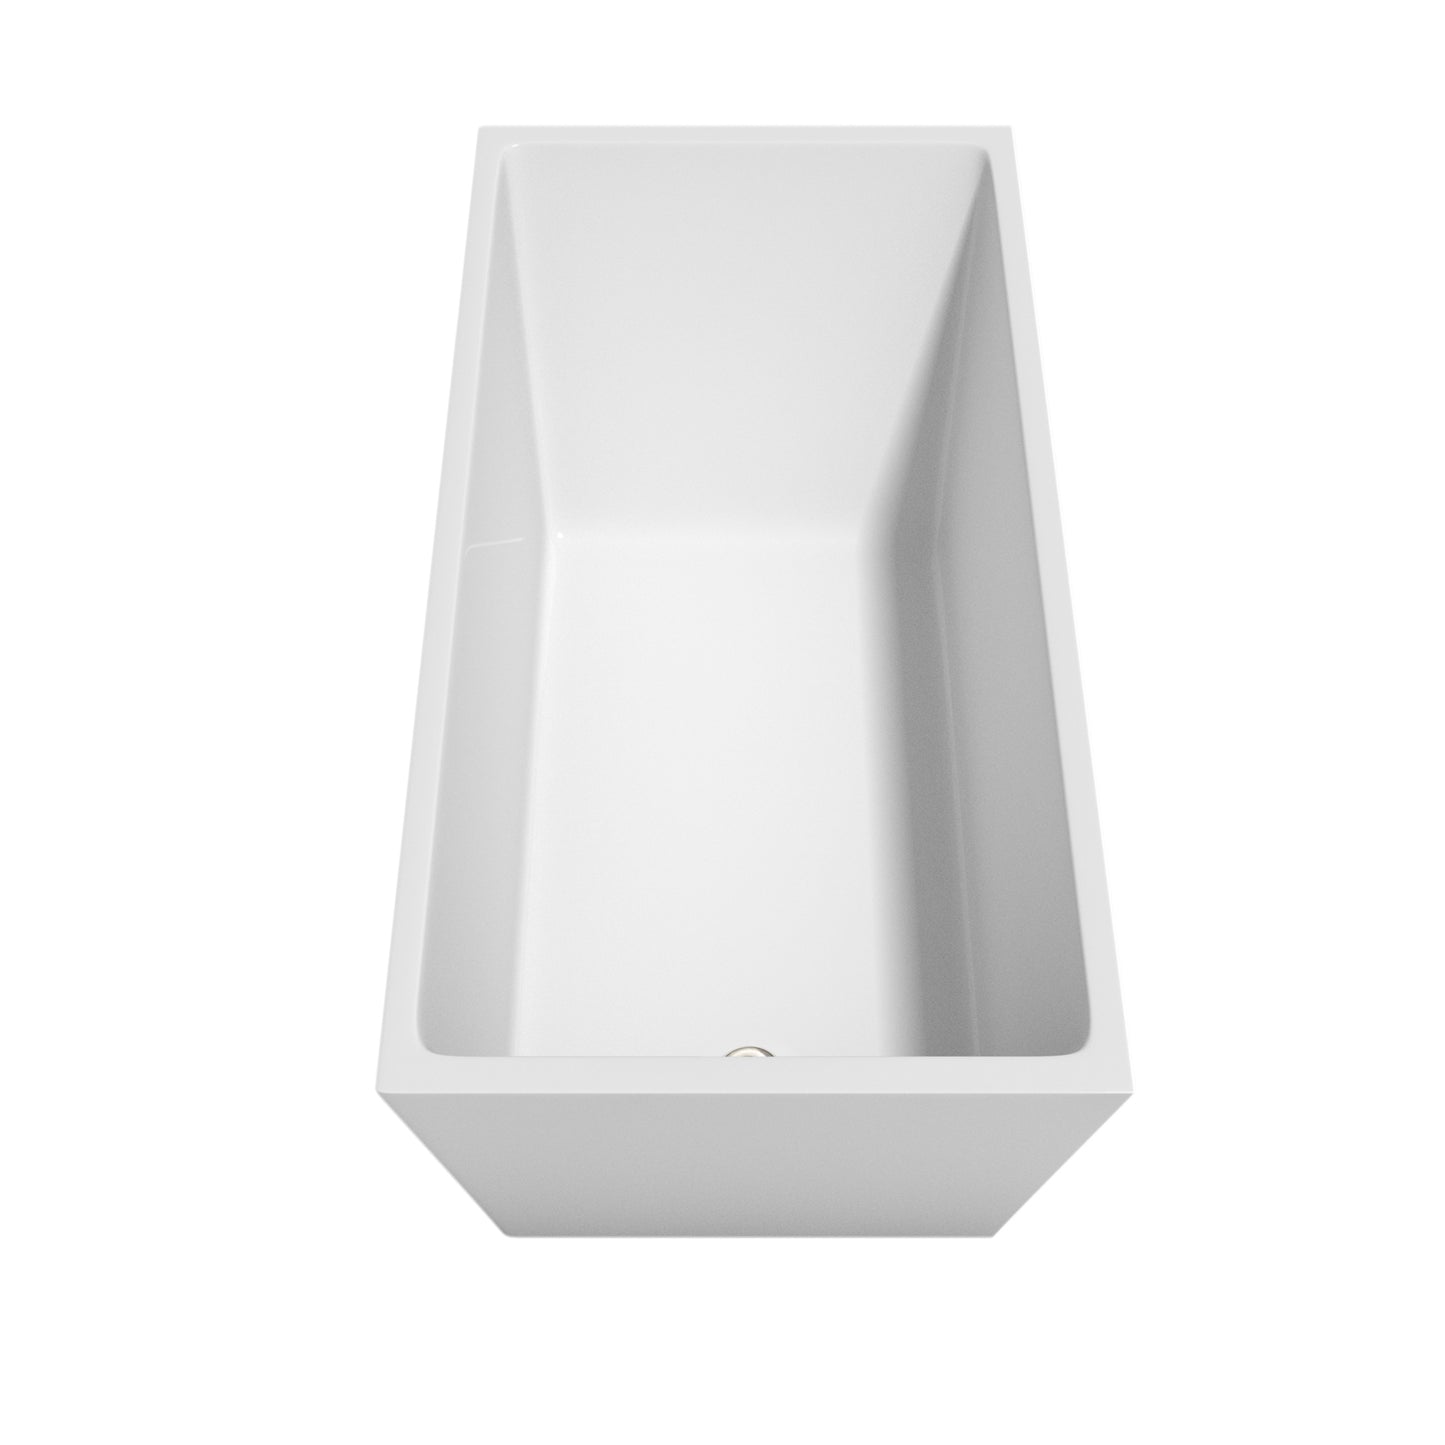 Wyndham Collection Hannah 59 Inch Freestanding Bathtub in White with Brushed Nickel Drain and Overflow Trim - Luxe Bathroom Vanities